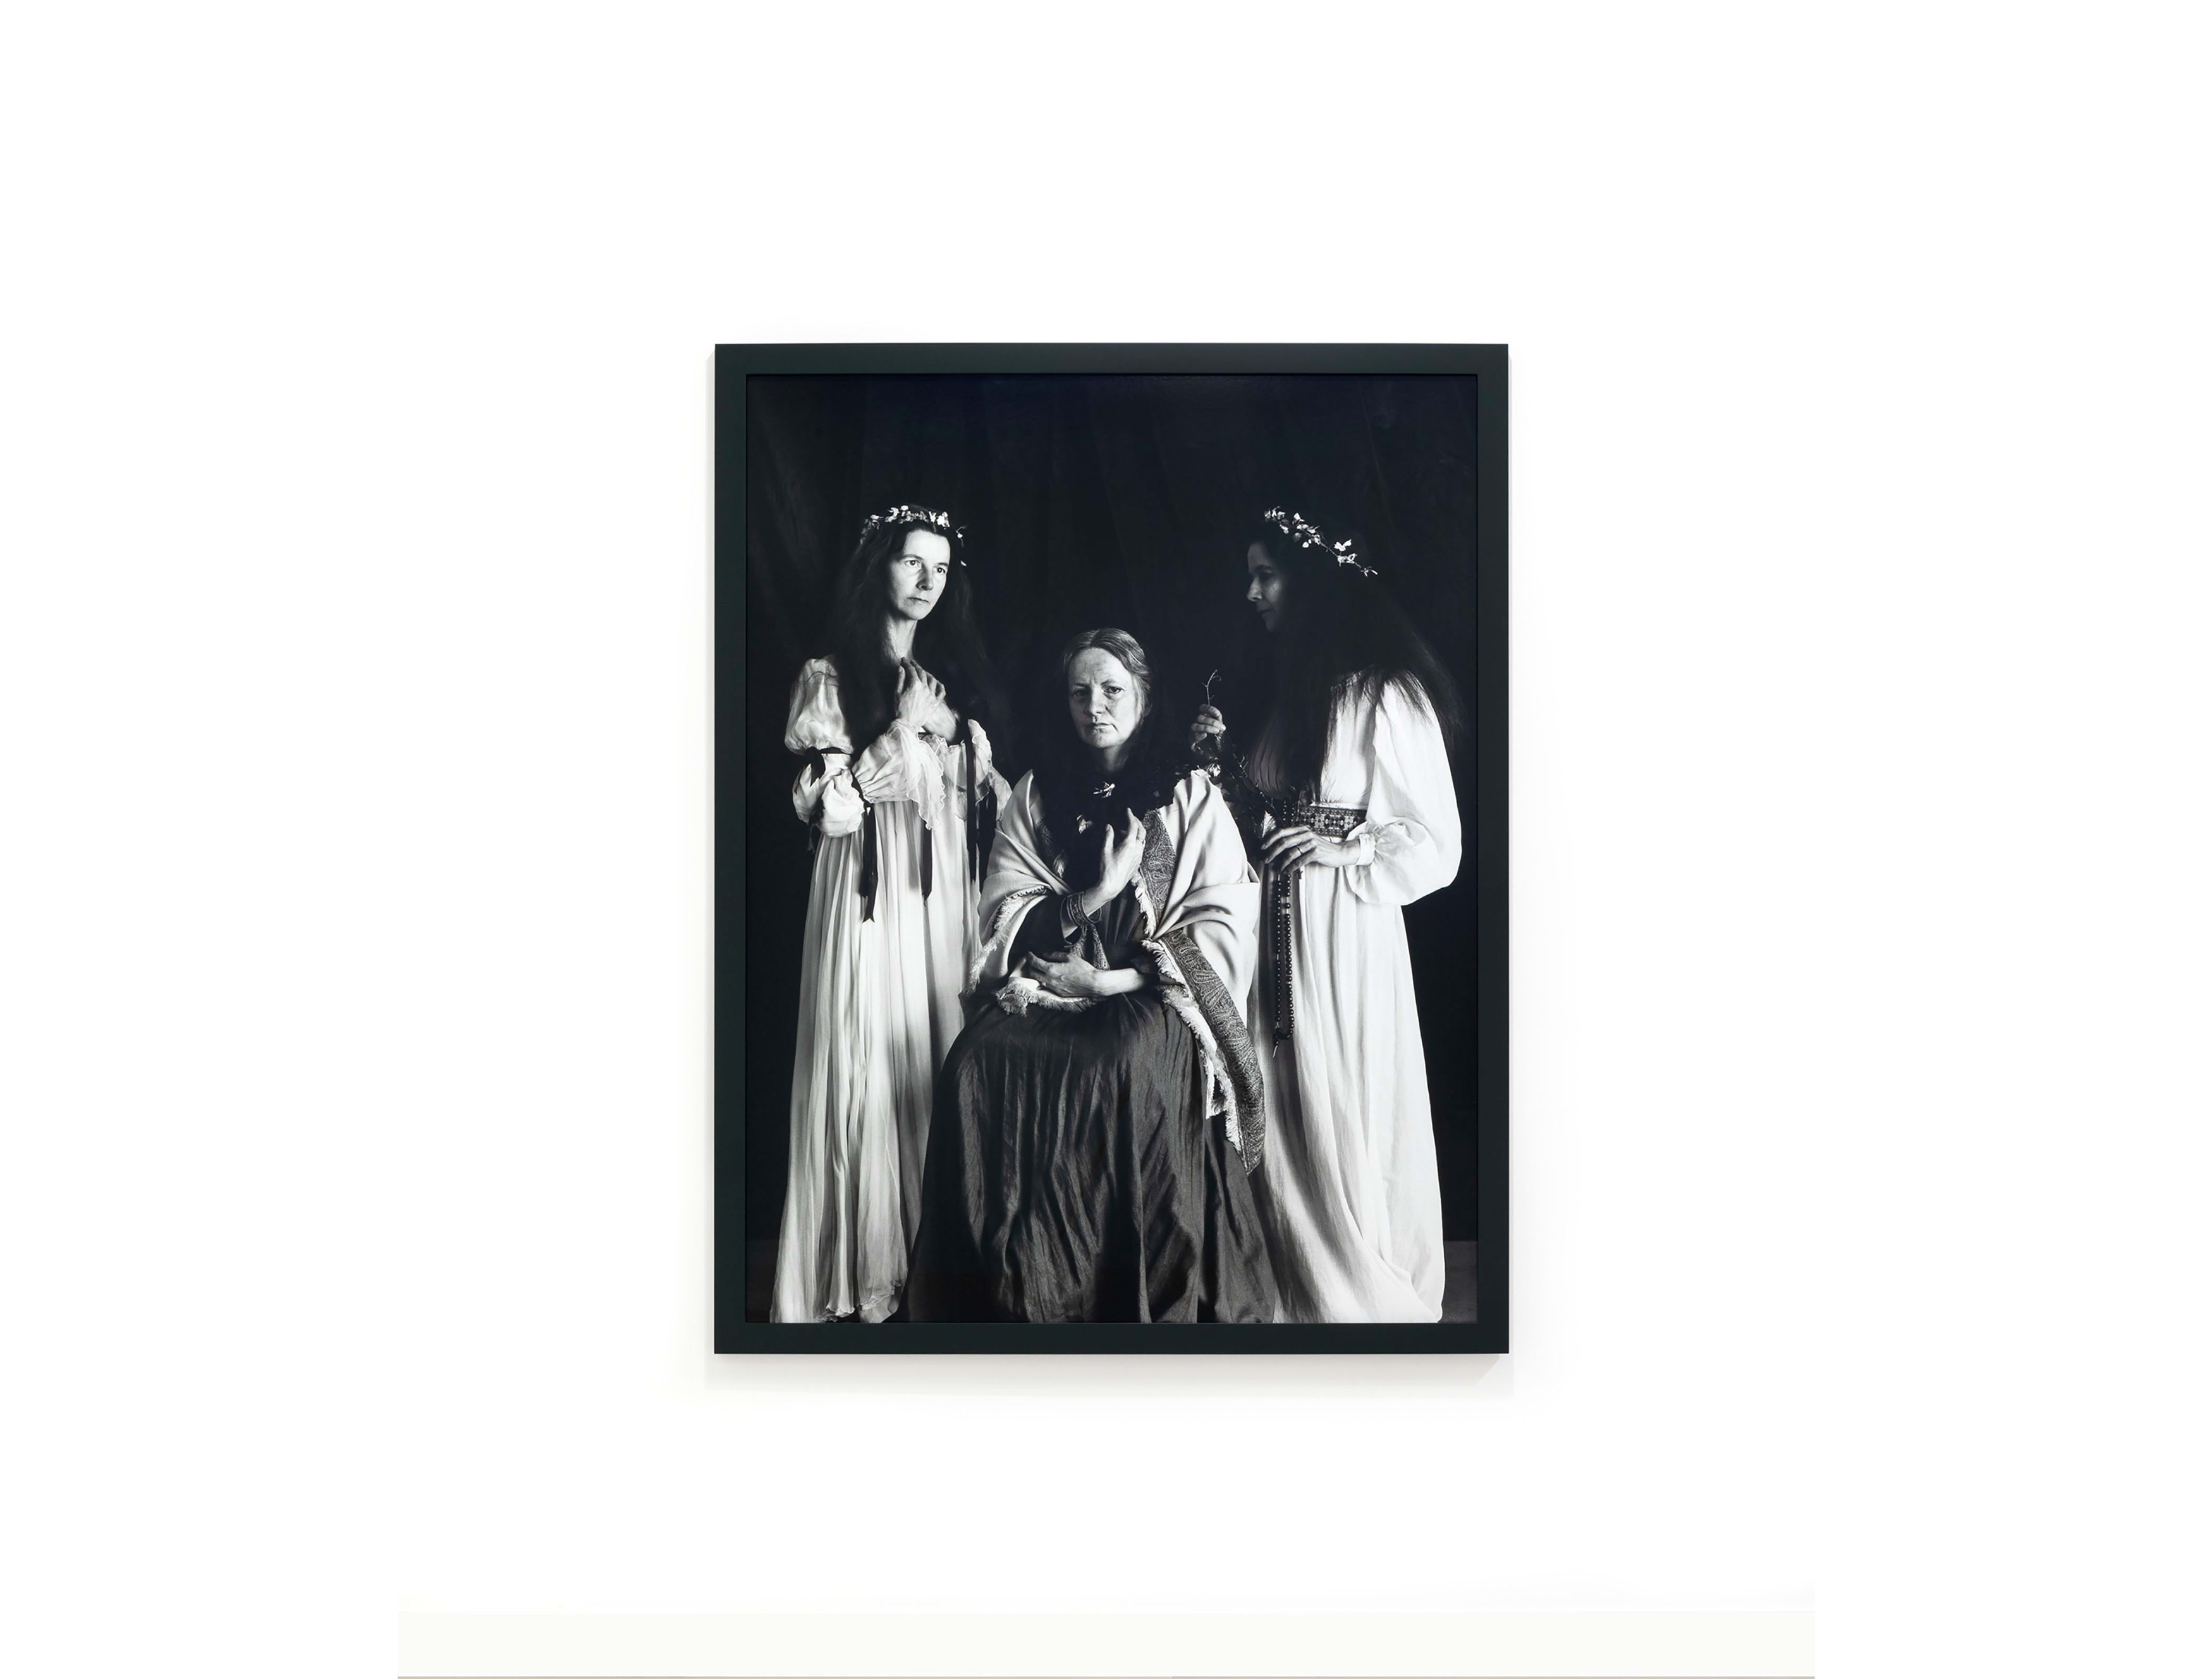 Me As Julia Margaret Cameron and two muses